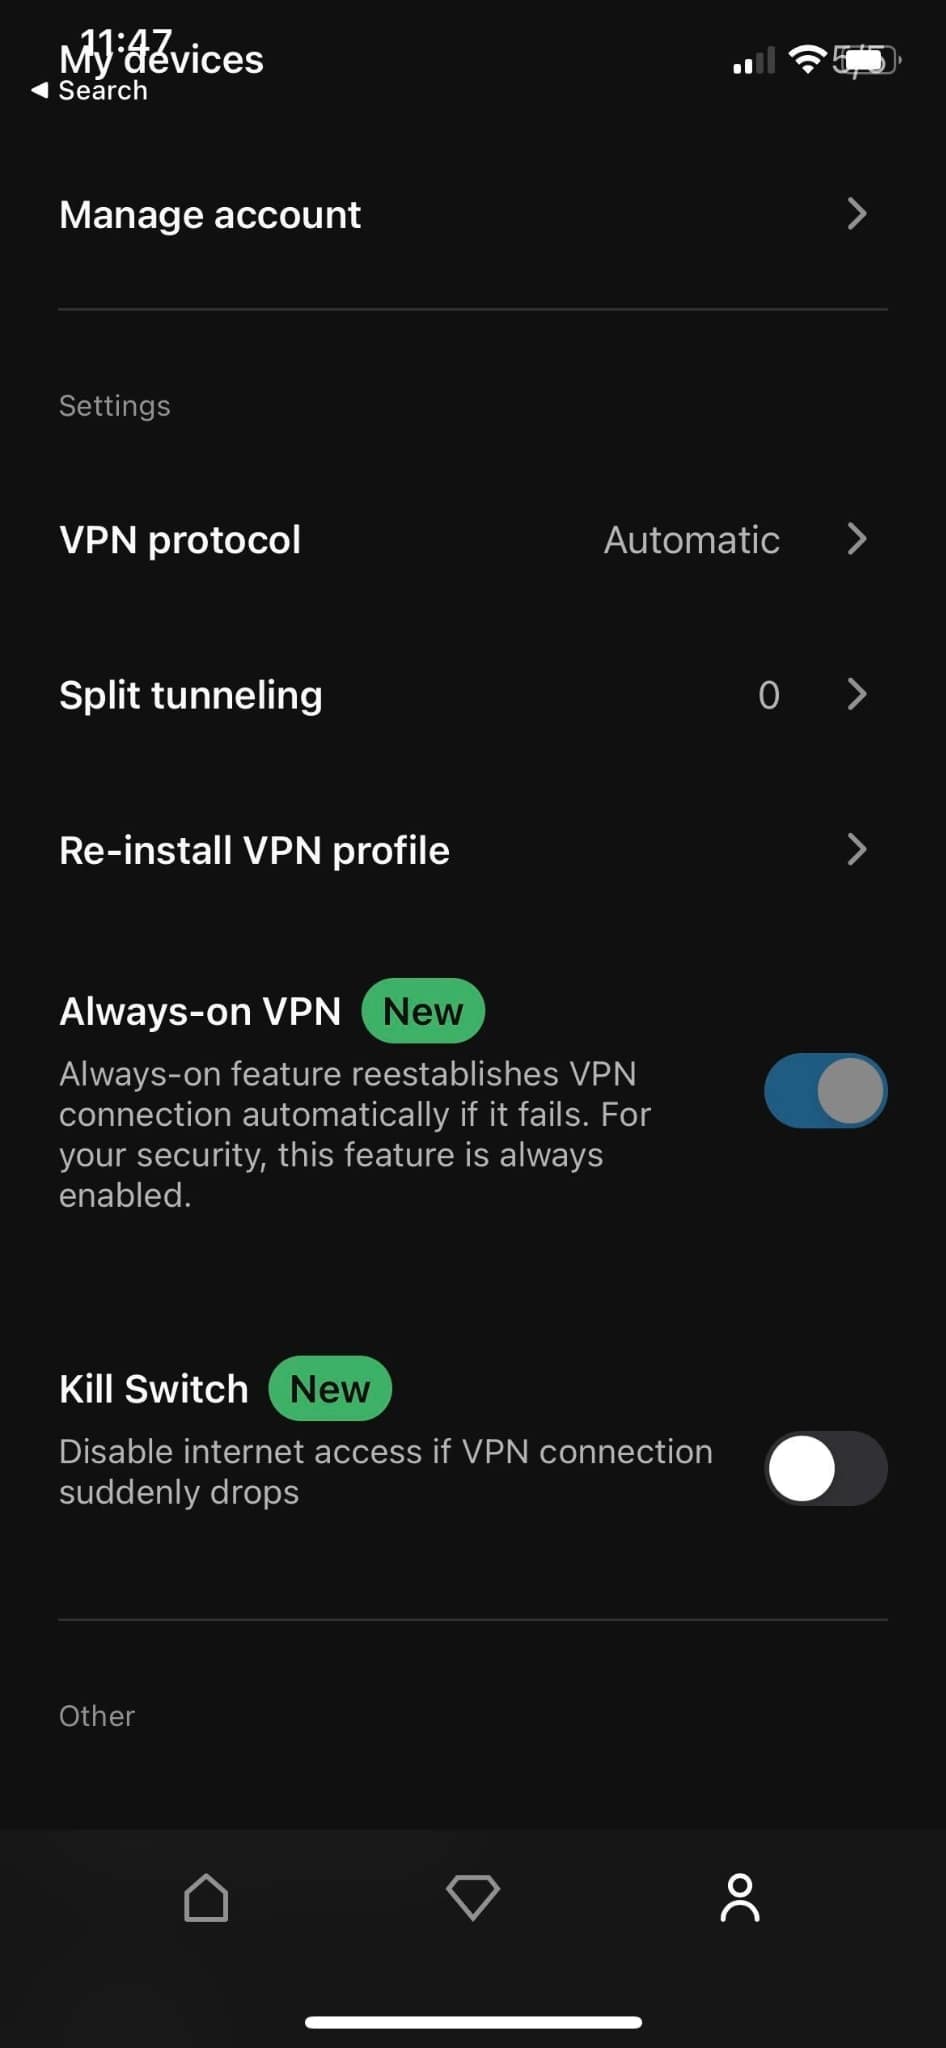 Hotspot Shield review: Here's a VPN that actually lives up to its